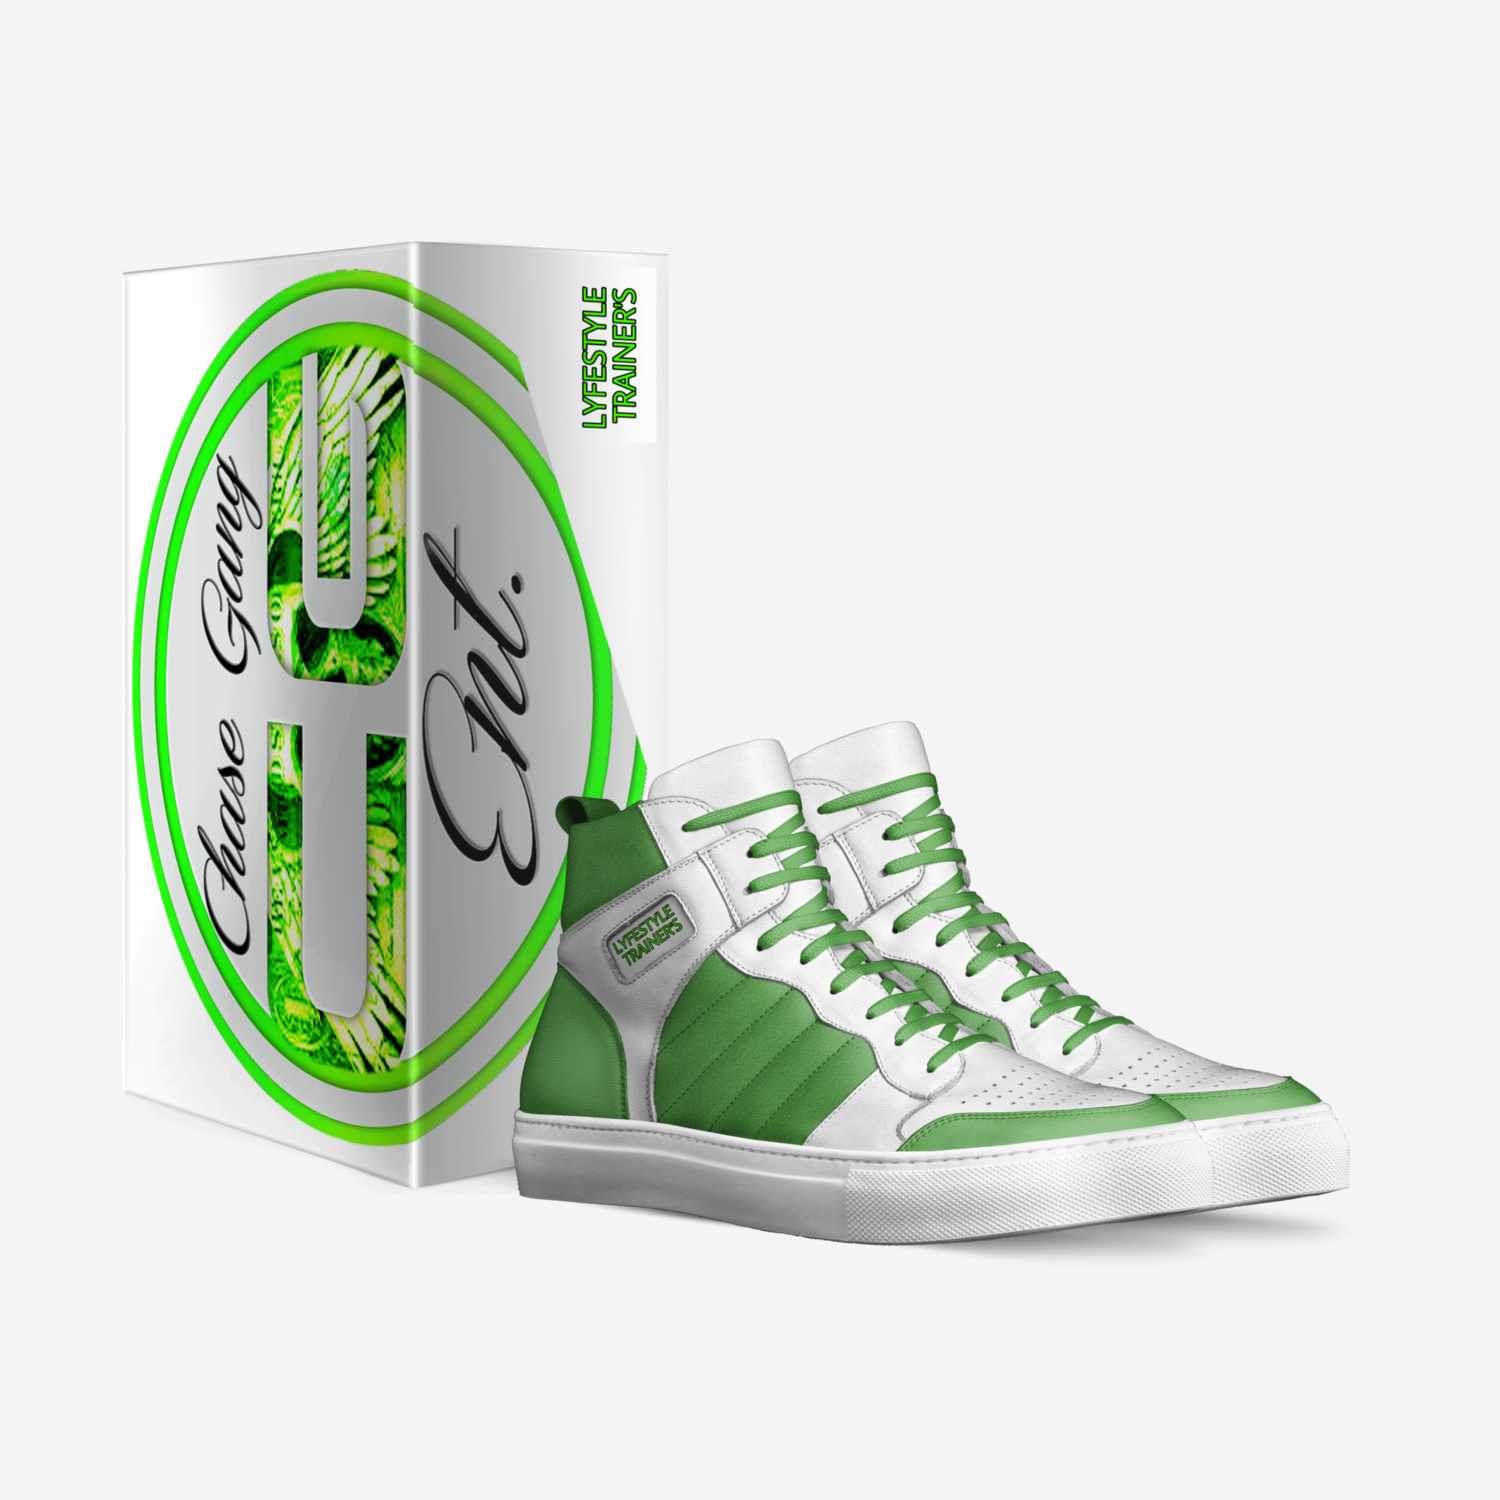 LYFESTYLE Trainer's custom made in Italy shoes by Chase Gang Entertainment | Box view